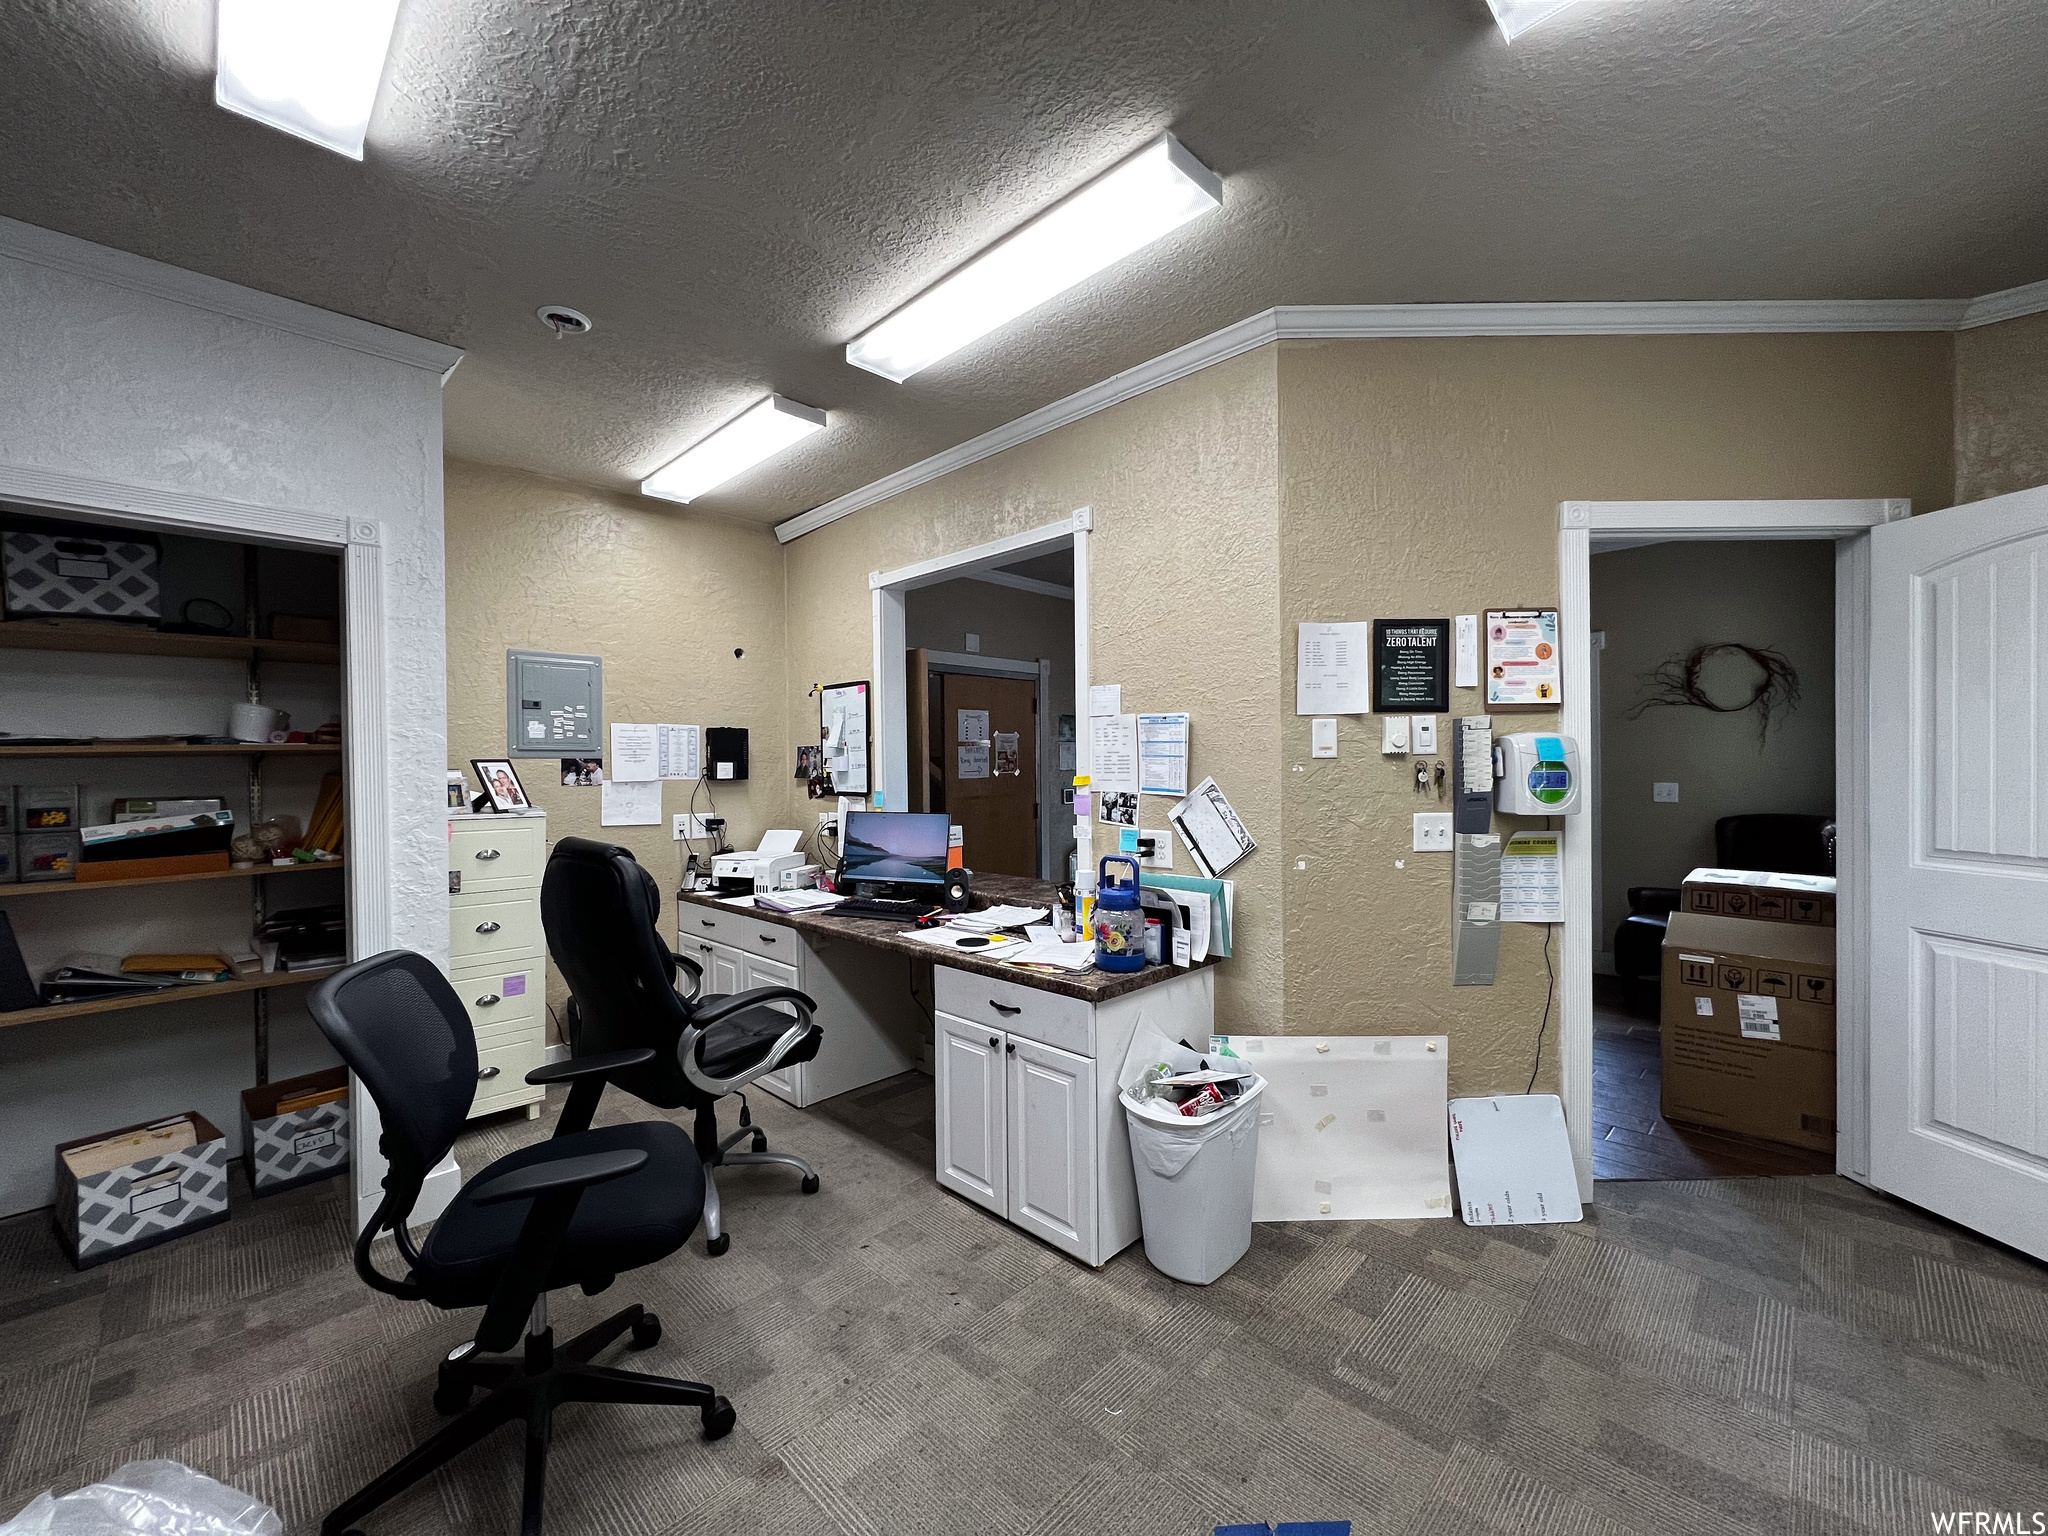 Office with a textured ceiling, ornamental molding, and dark carpet